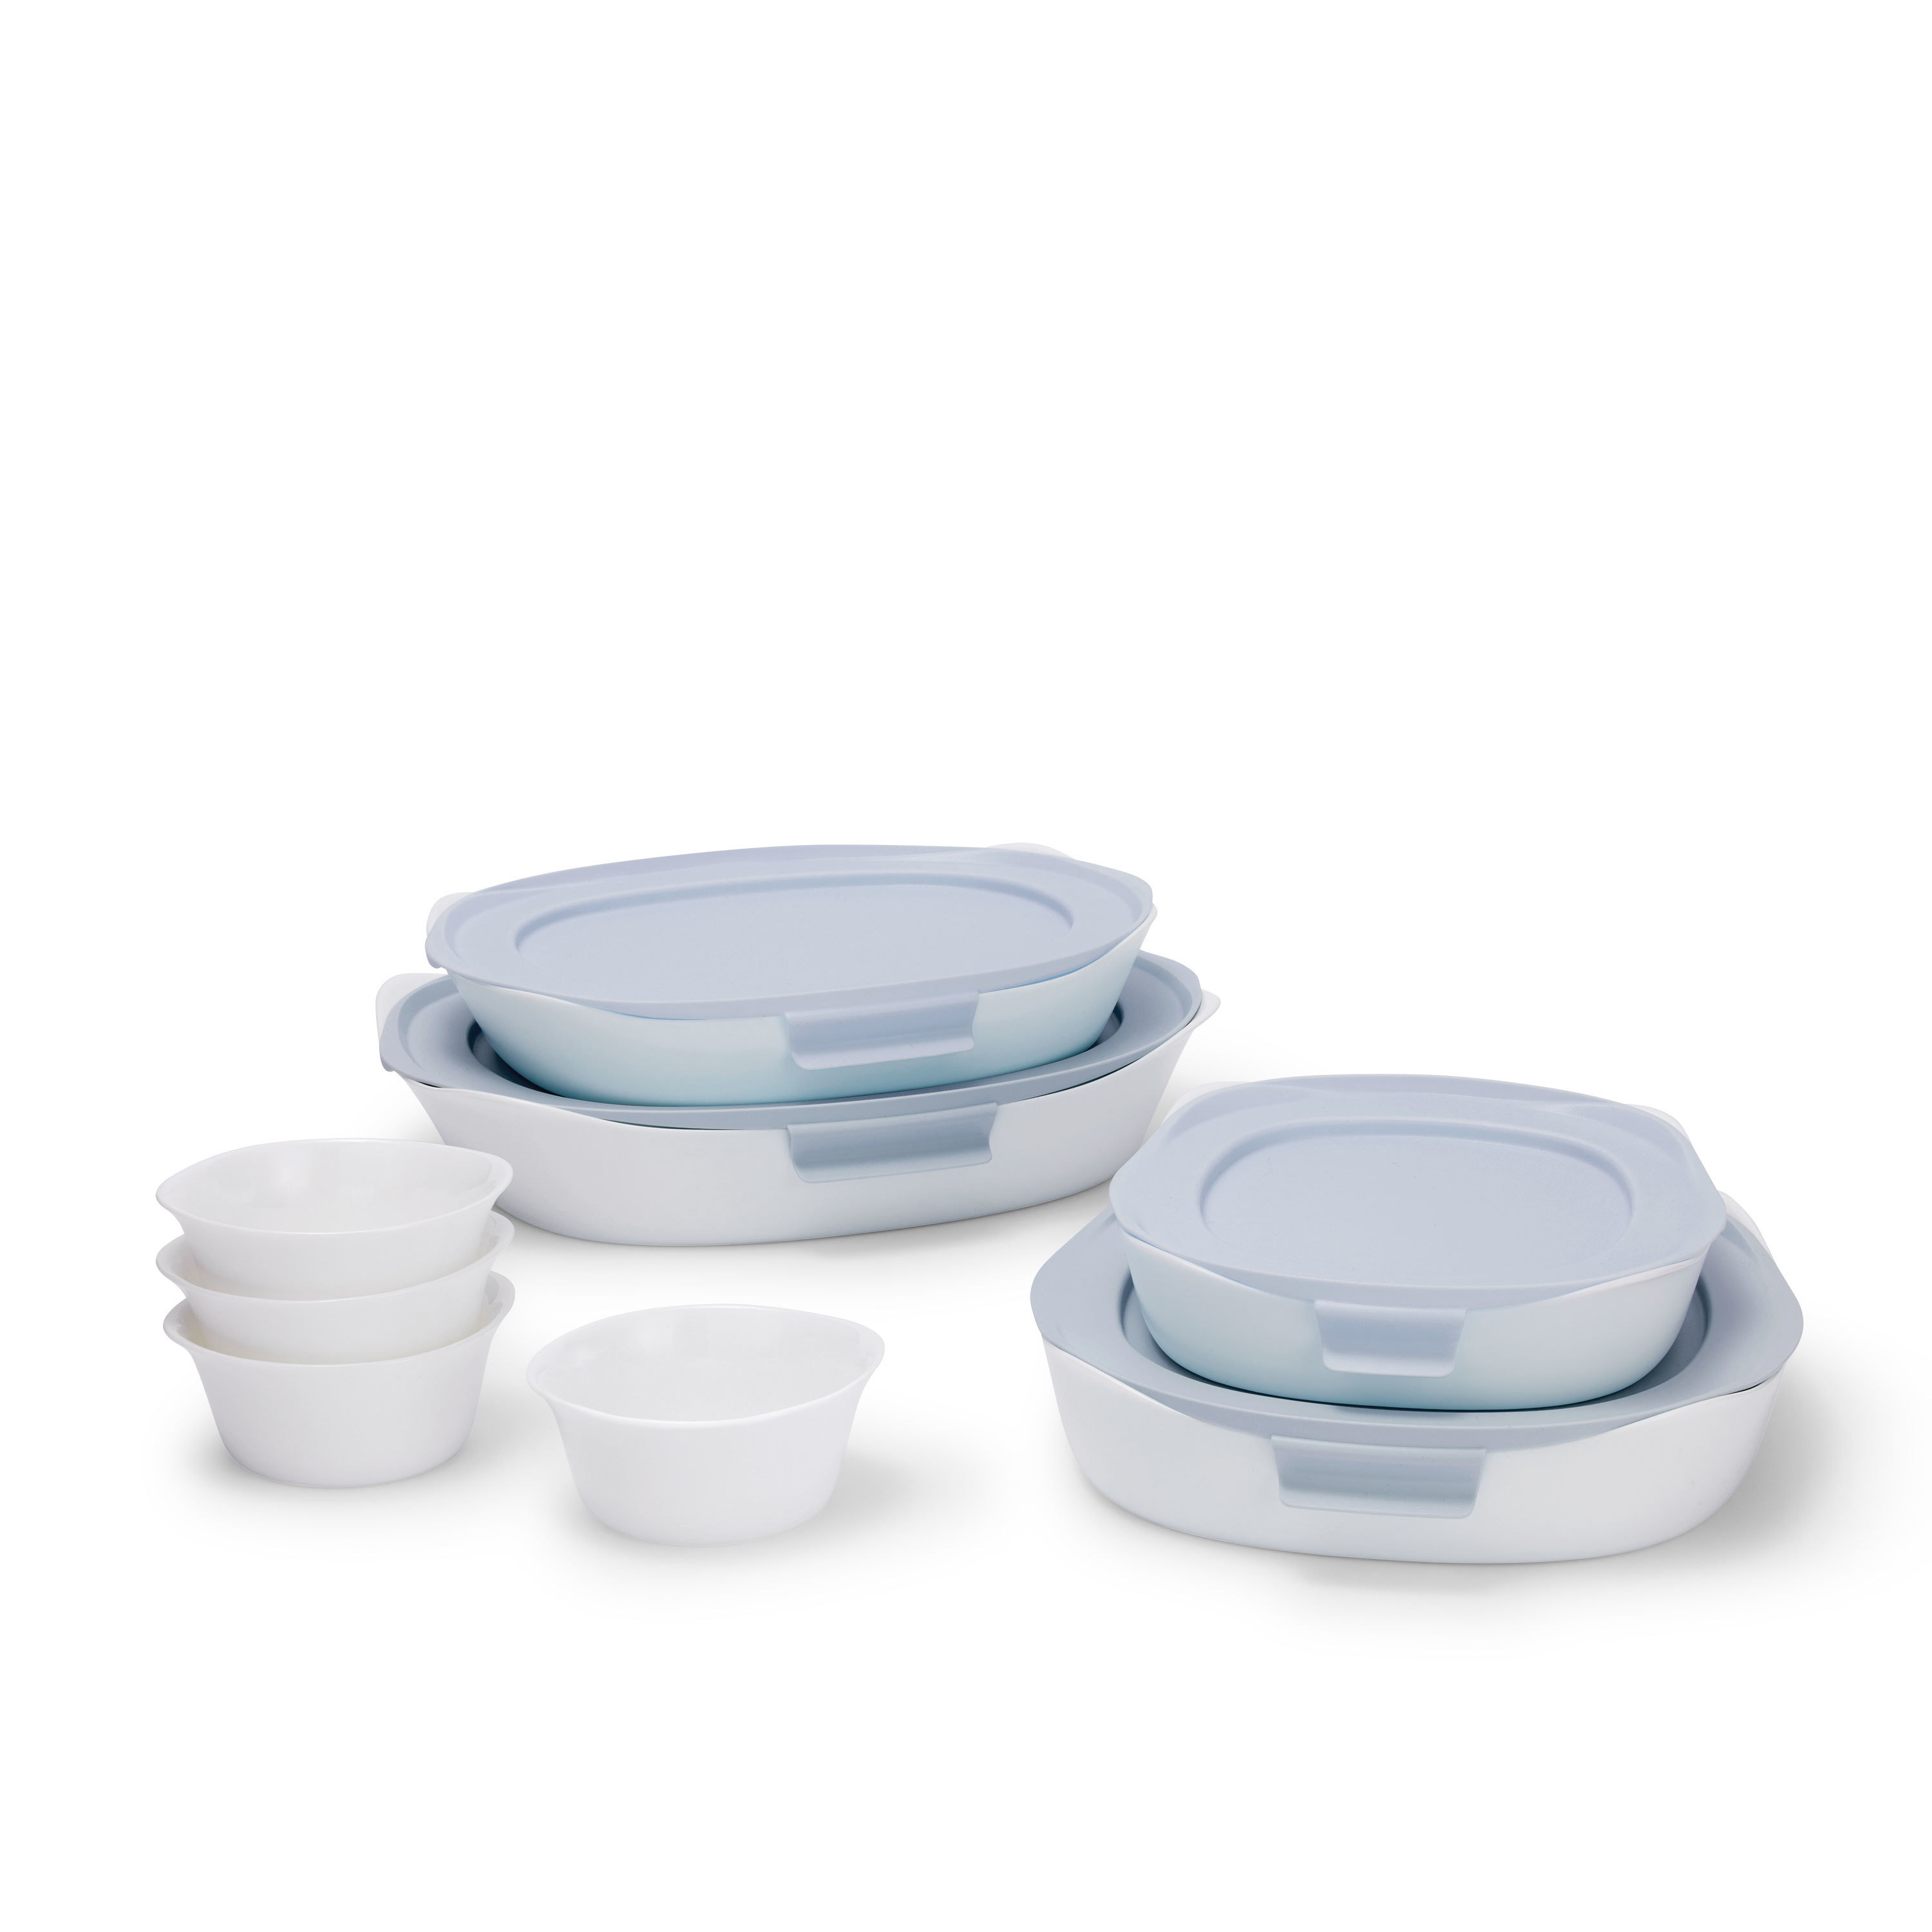 NutriChef 10-Piece Glass Food Containers - Stackable Superior